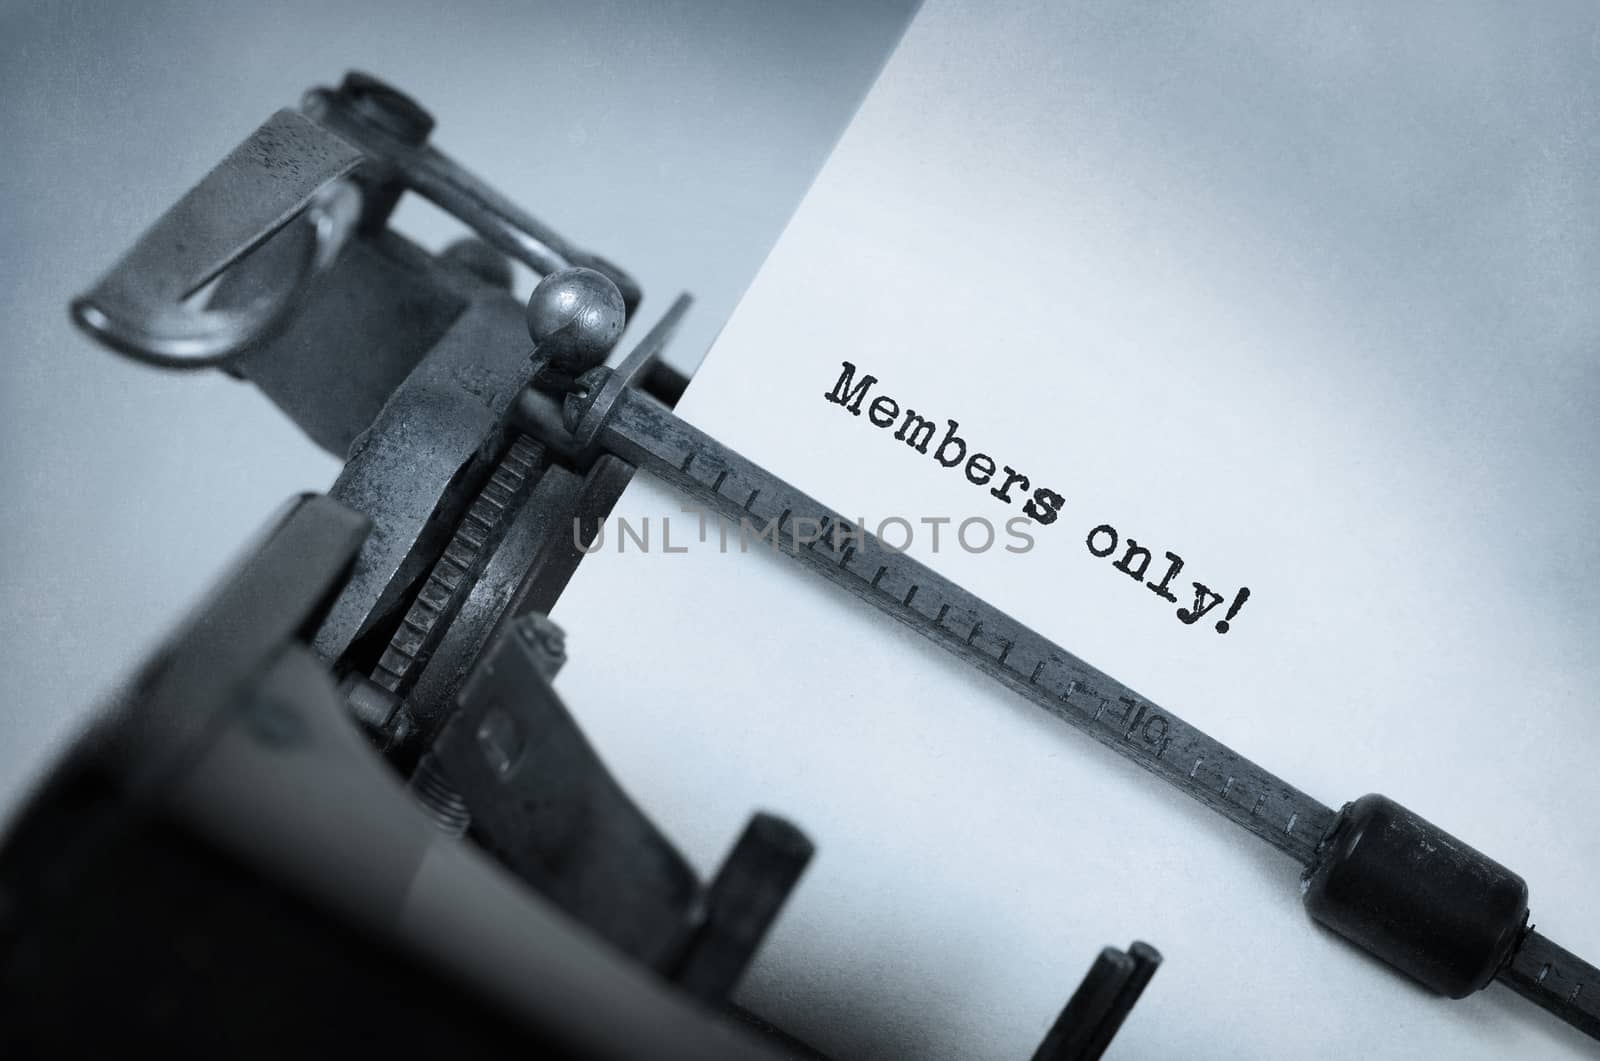 Vintage inscription made by old typewriter, members only